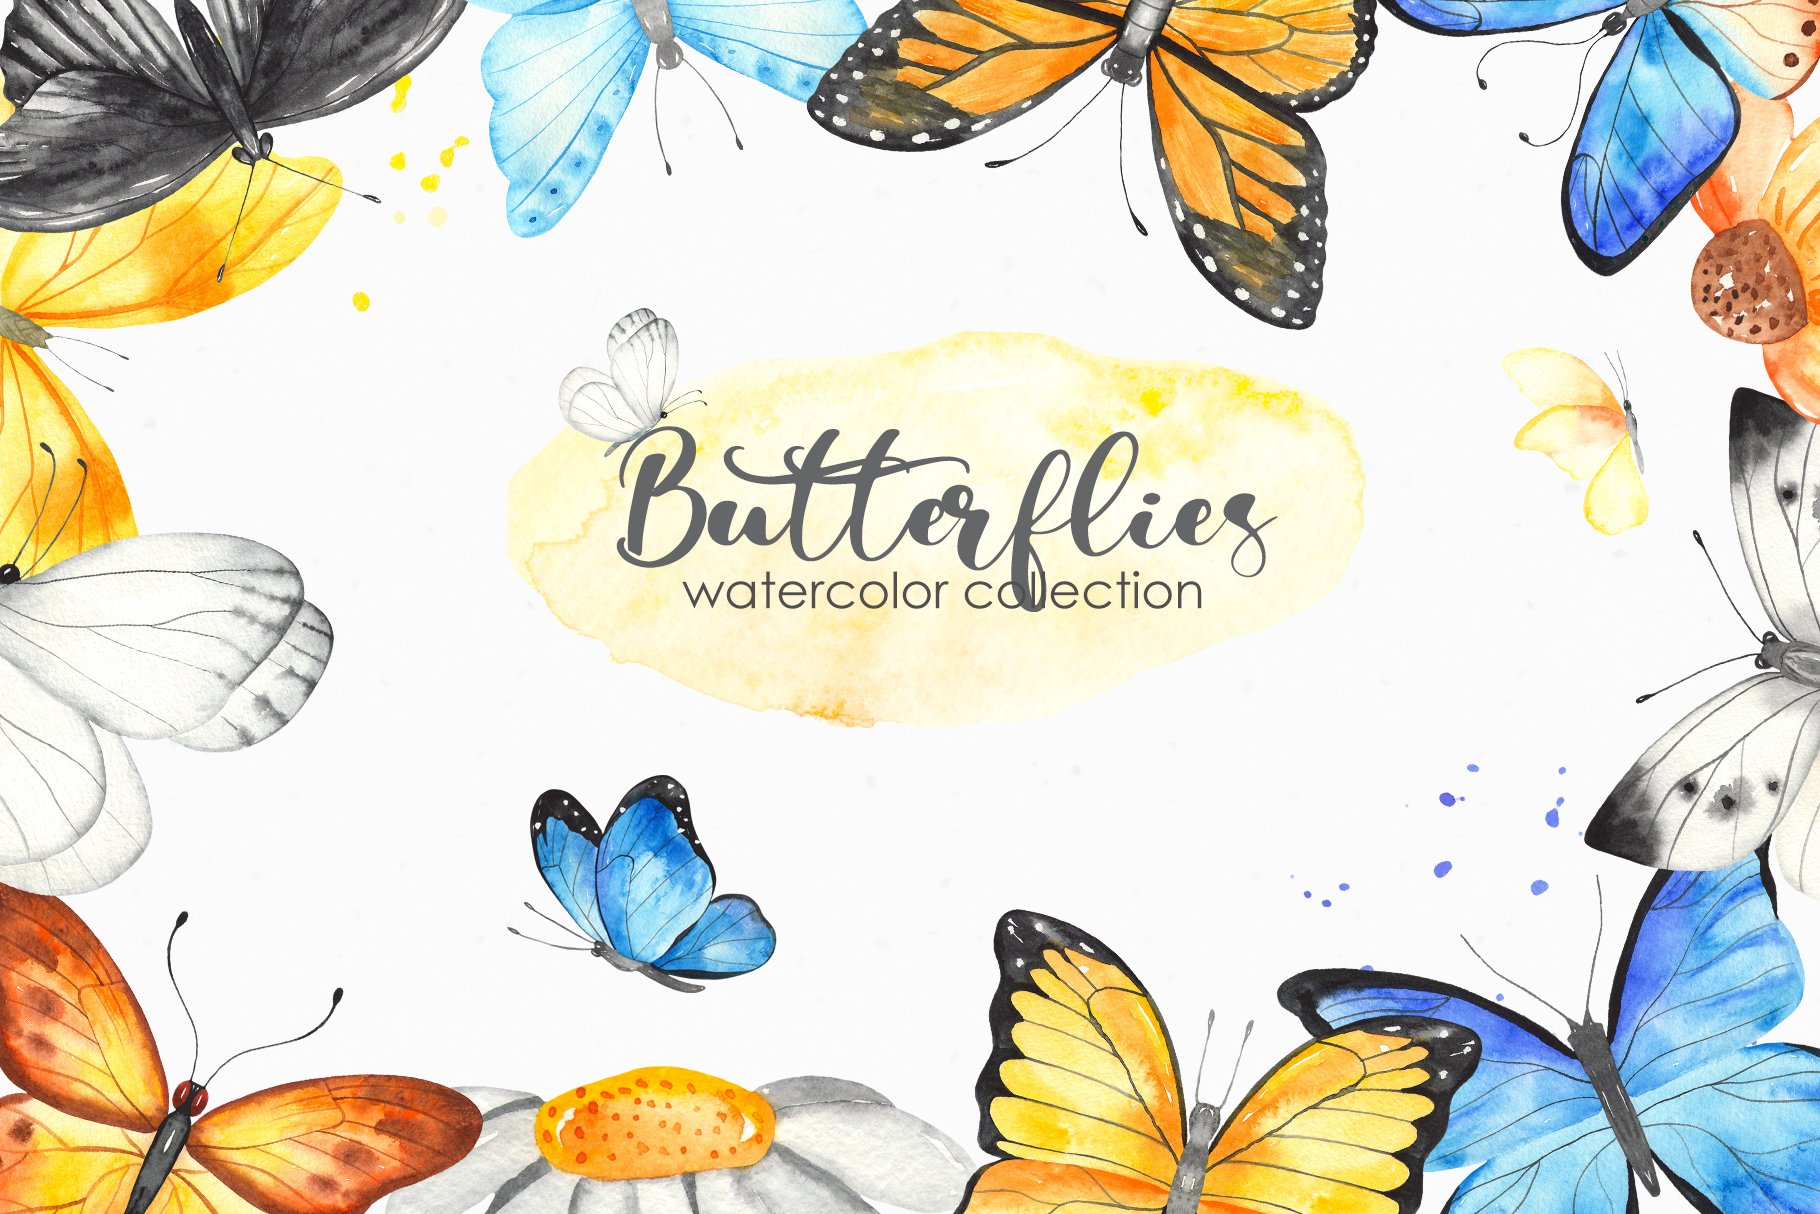 Butterflies Watercolor collection cover image.